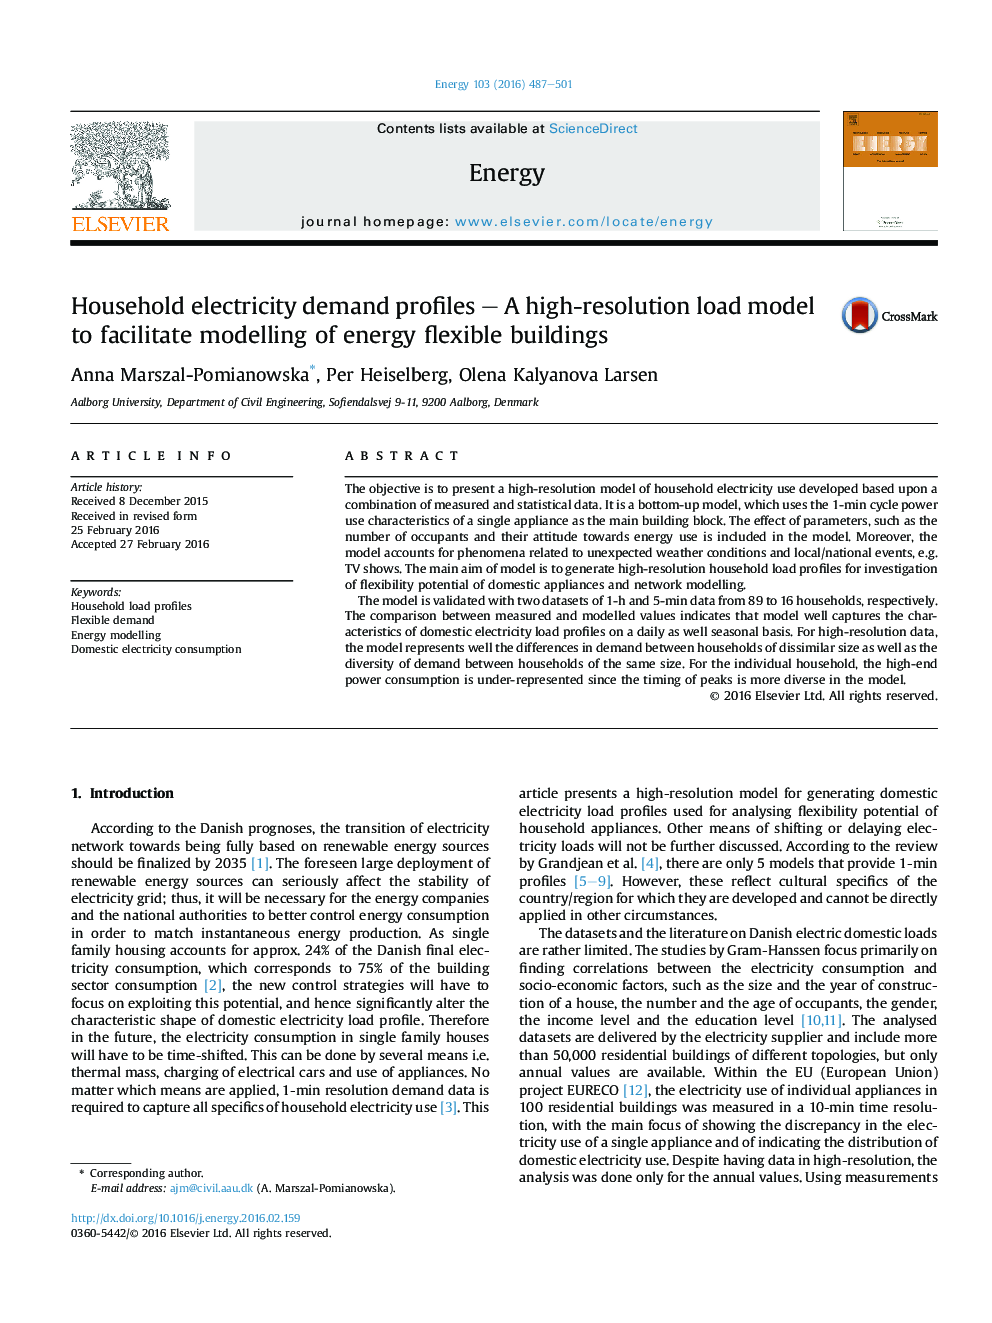 Household electricity demand profiles - A high-resolution load model to facilitate modelling of energy flexible buildings